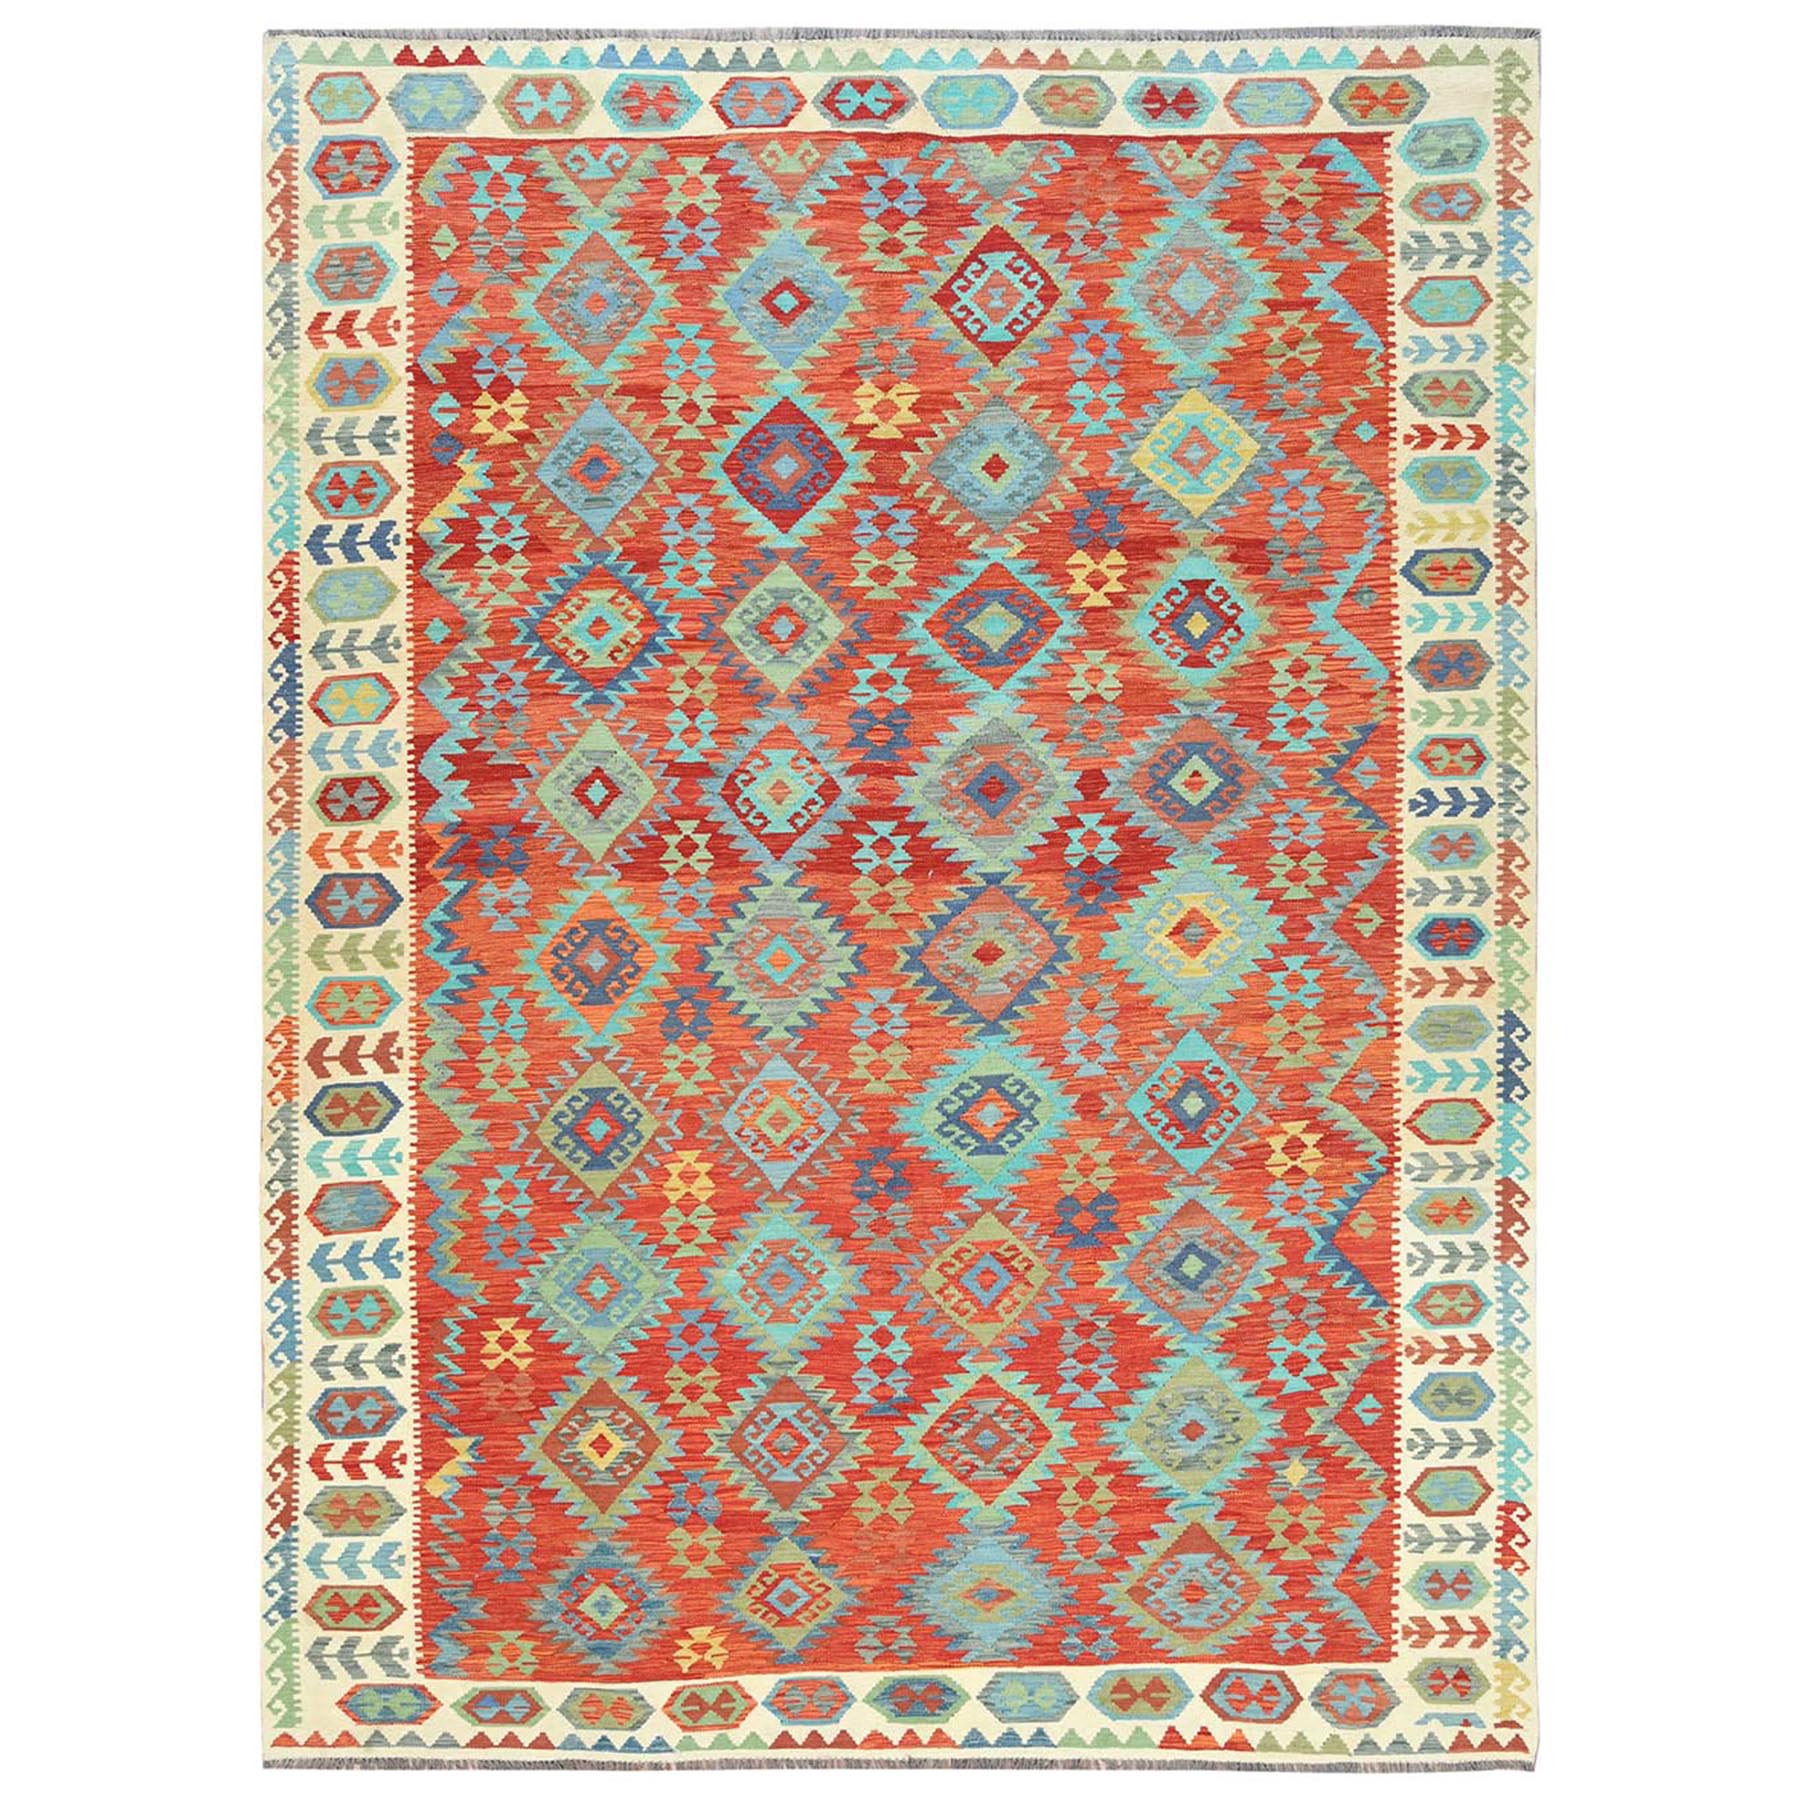 9'6"x13' Terracotta Colors, Hand Woven Afghan Kilim with Geometric Elements, Flat Weave Veggie Dyes Vibrant Wool, Reversible Oriental Rug 